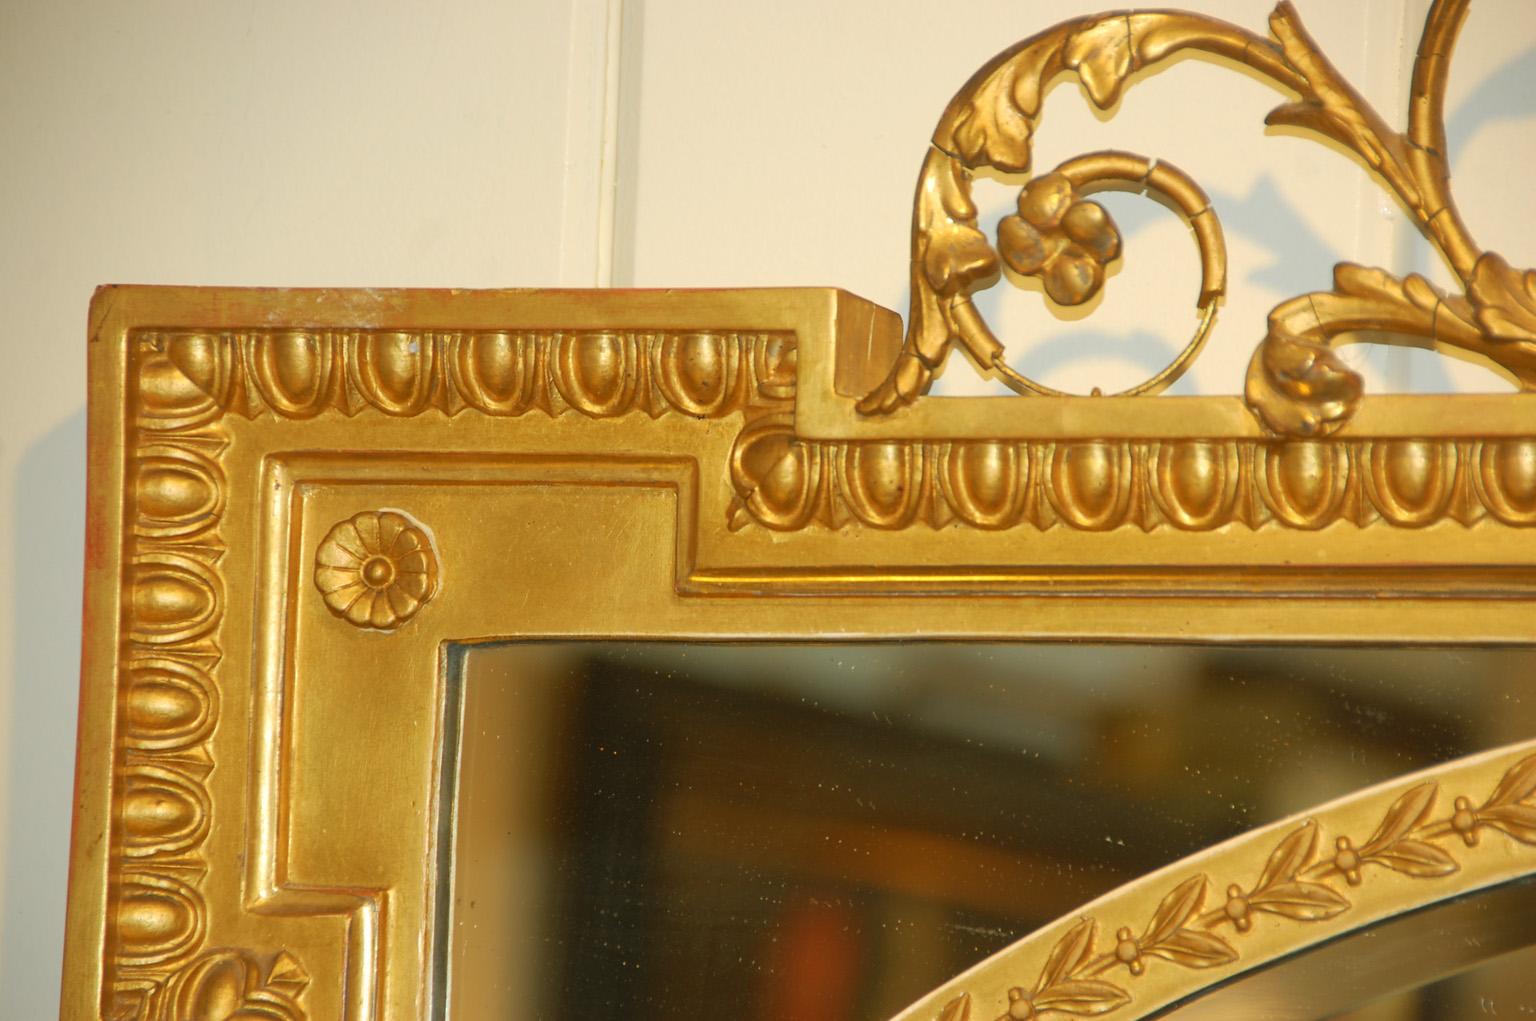 Wood English Edwardian Gold Mirror with Urn and Trailing Leaves Surmounting the Frame For Sale